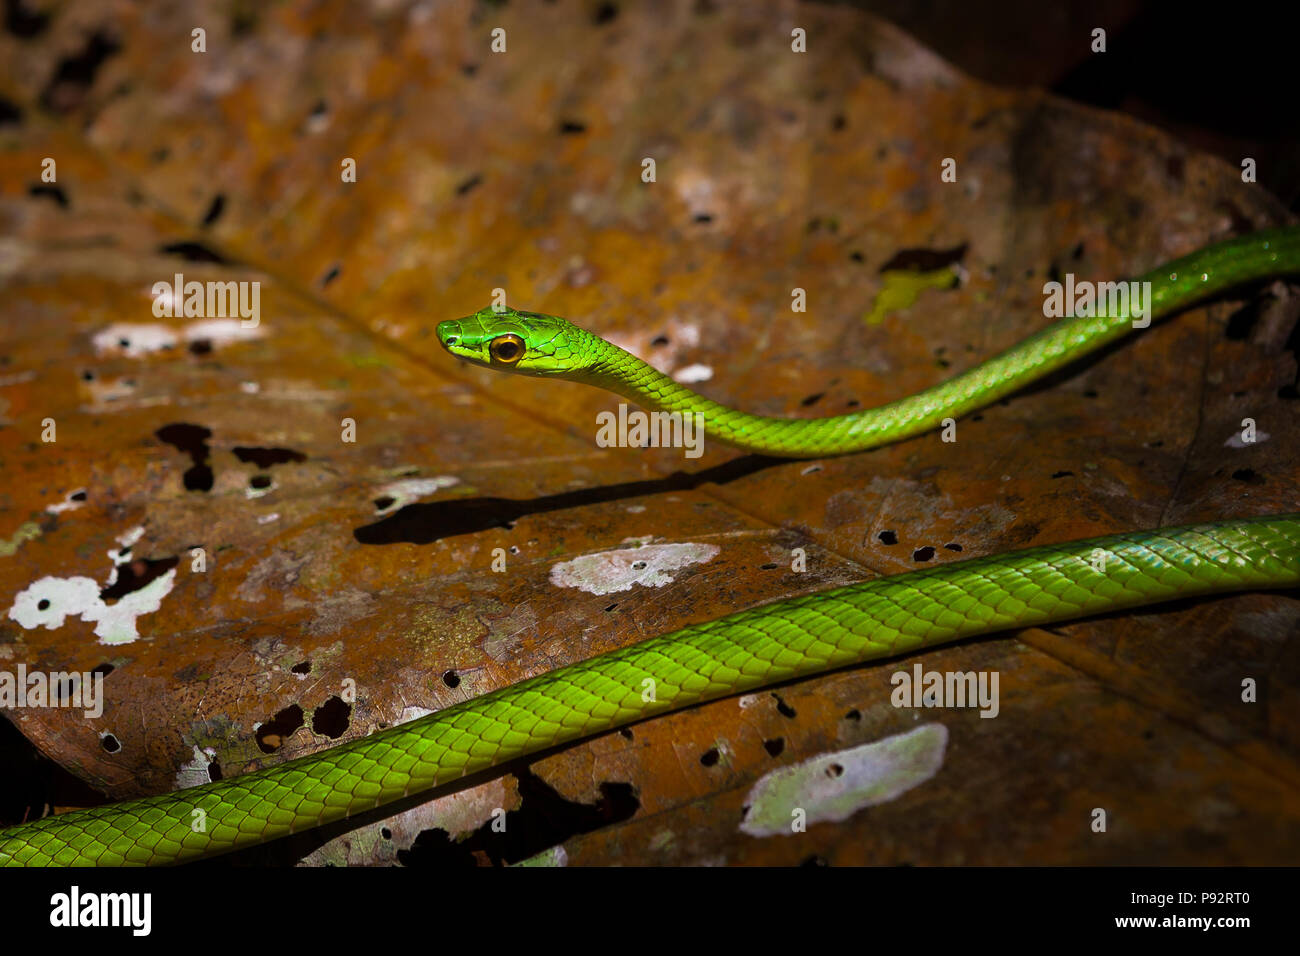 Panama wildlife with a green vine snake, Oxybelis fulgidus, on the rainforest floor in Chagres national park, along the old Camino Real Trail, Panama. Stock Photo